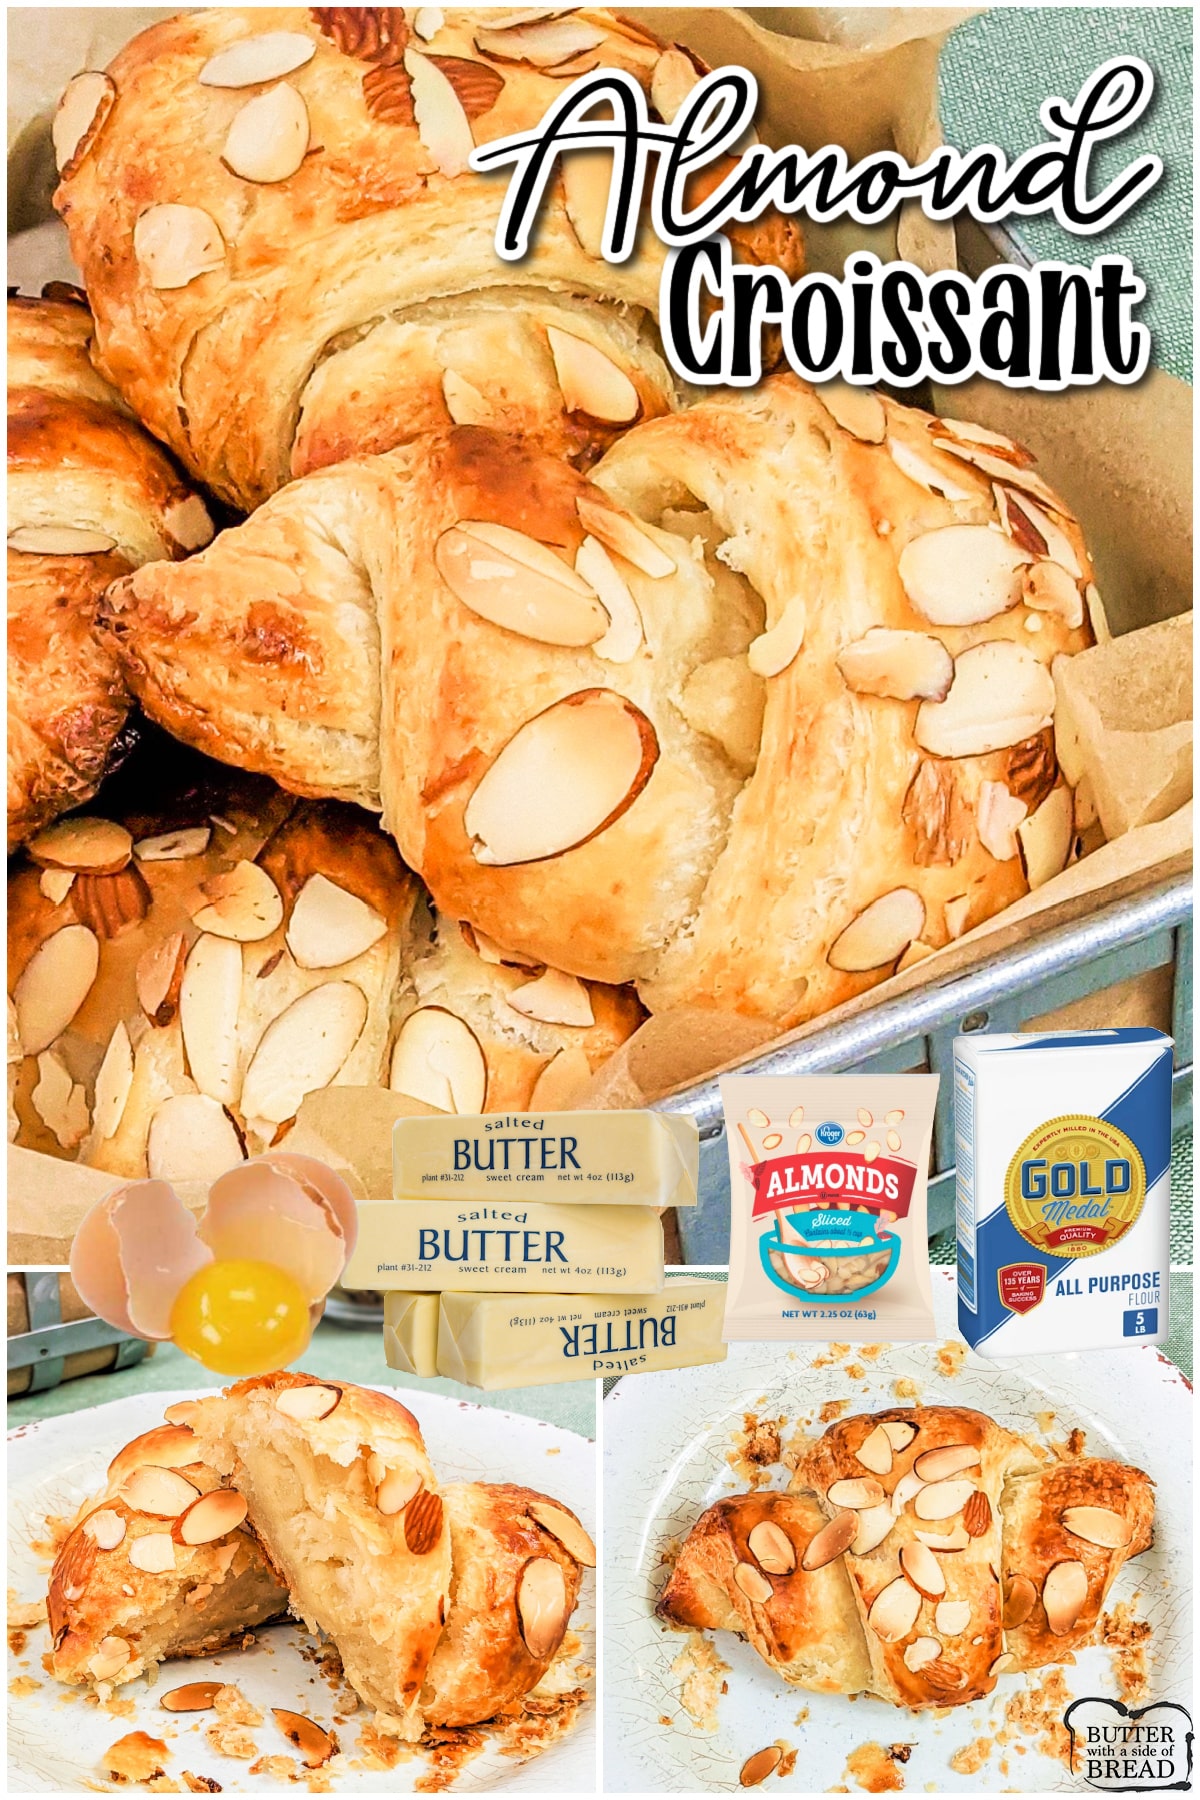 Almond Croissants a delicious, flaky, homemade treat that brings the bakery to you! Give this recipe for almond croissants a try, every buttery batch is well worth it! 